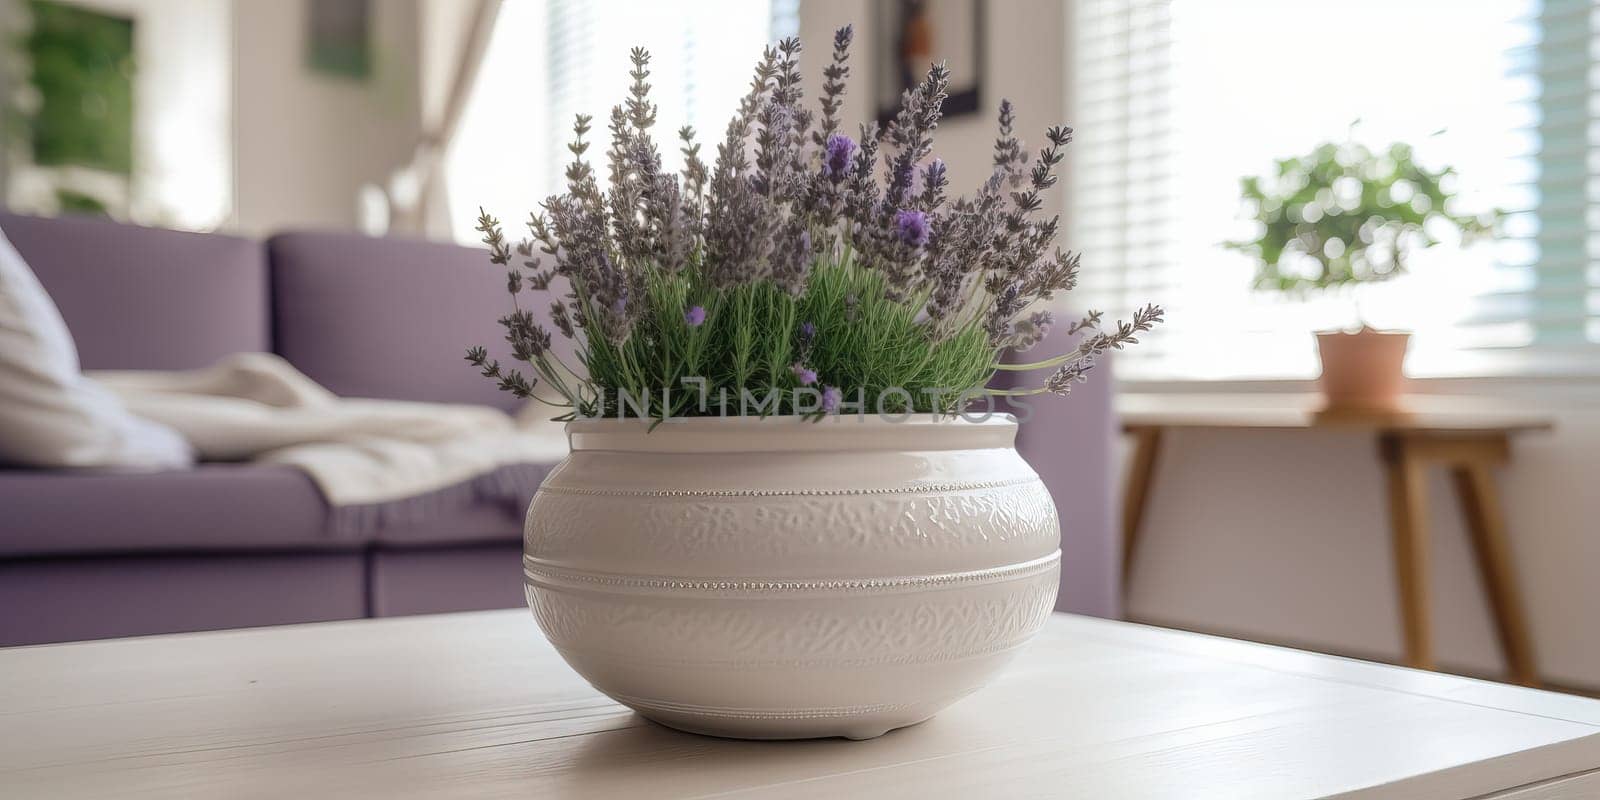 Lovely White Pot With Lavender Plant On A Living Room Table